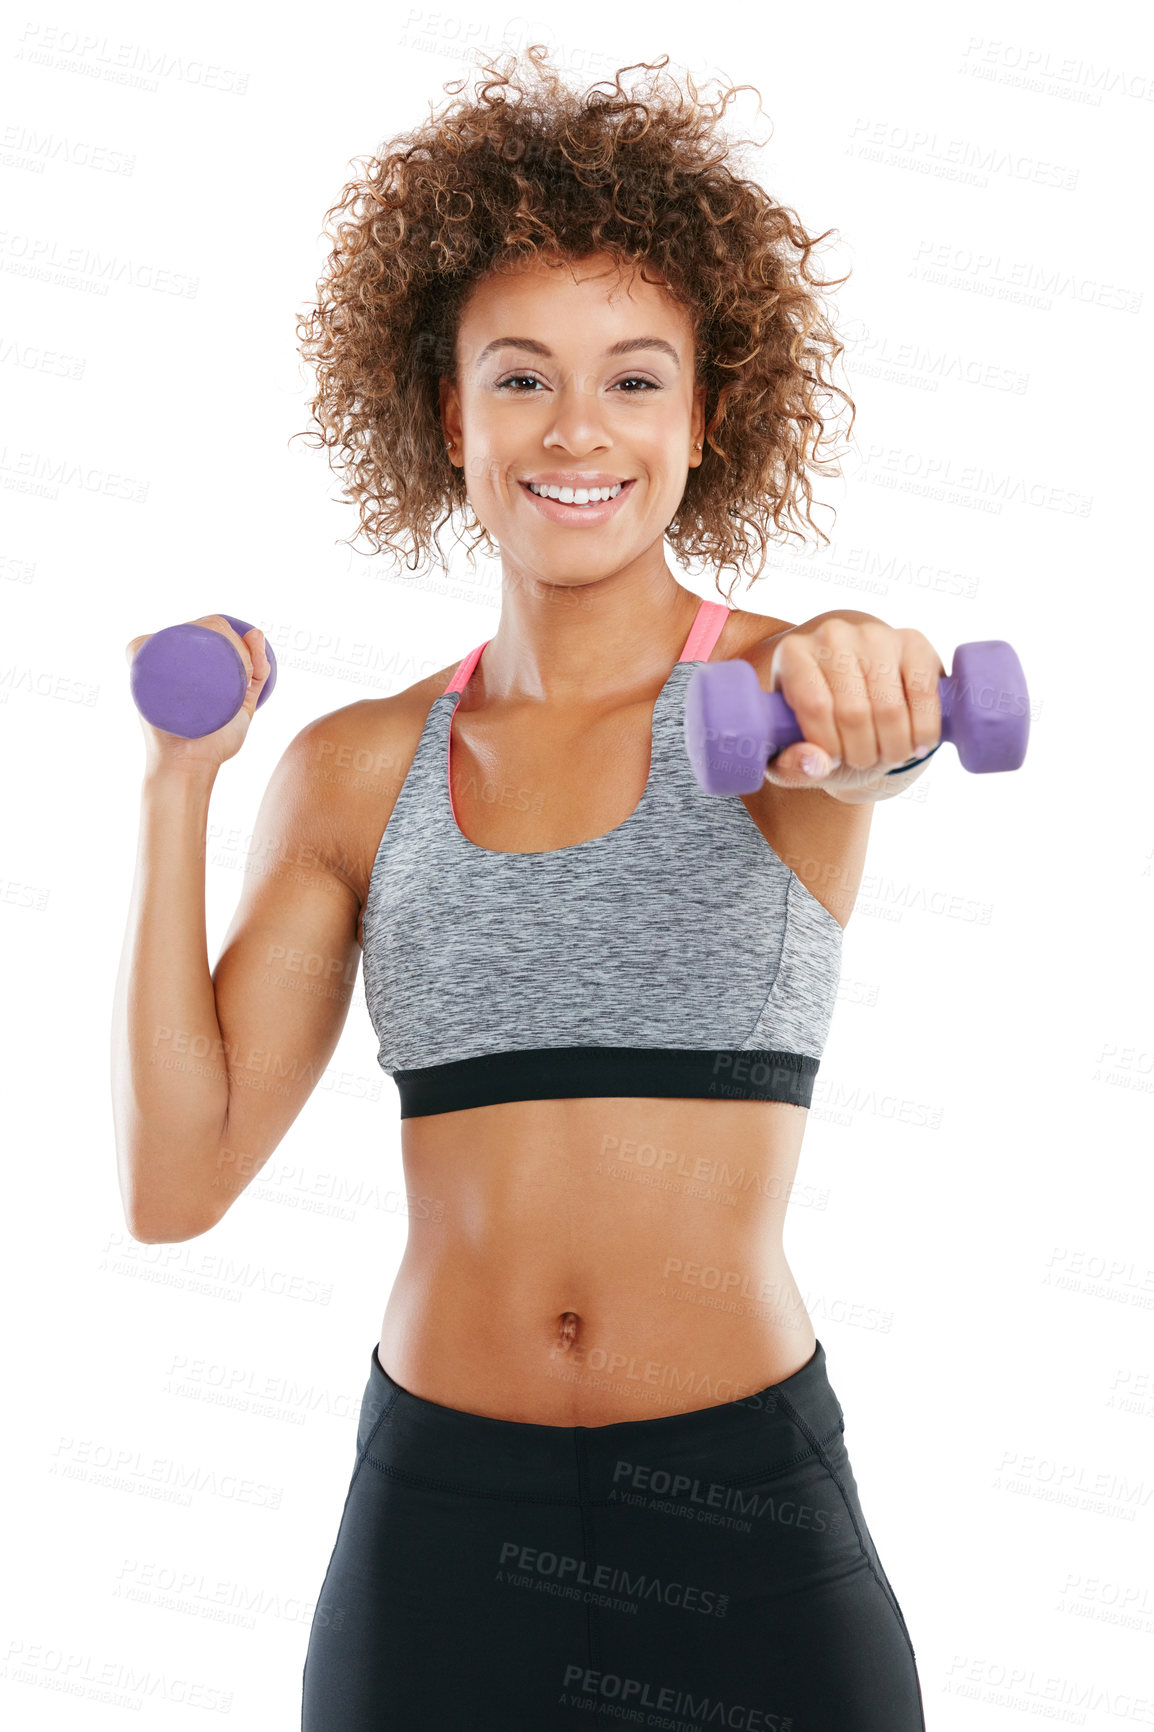 Buy stock photo Studio shot of a fit young woman lifting weights against a white background